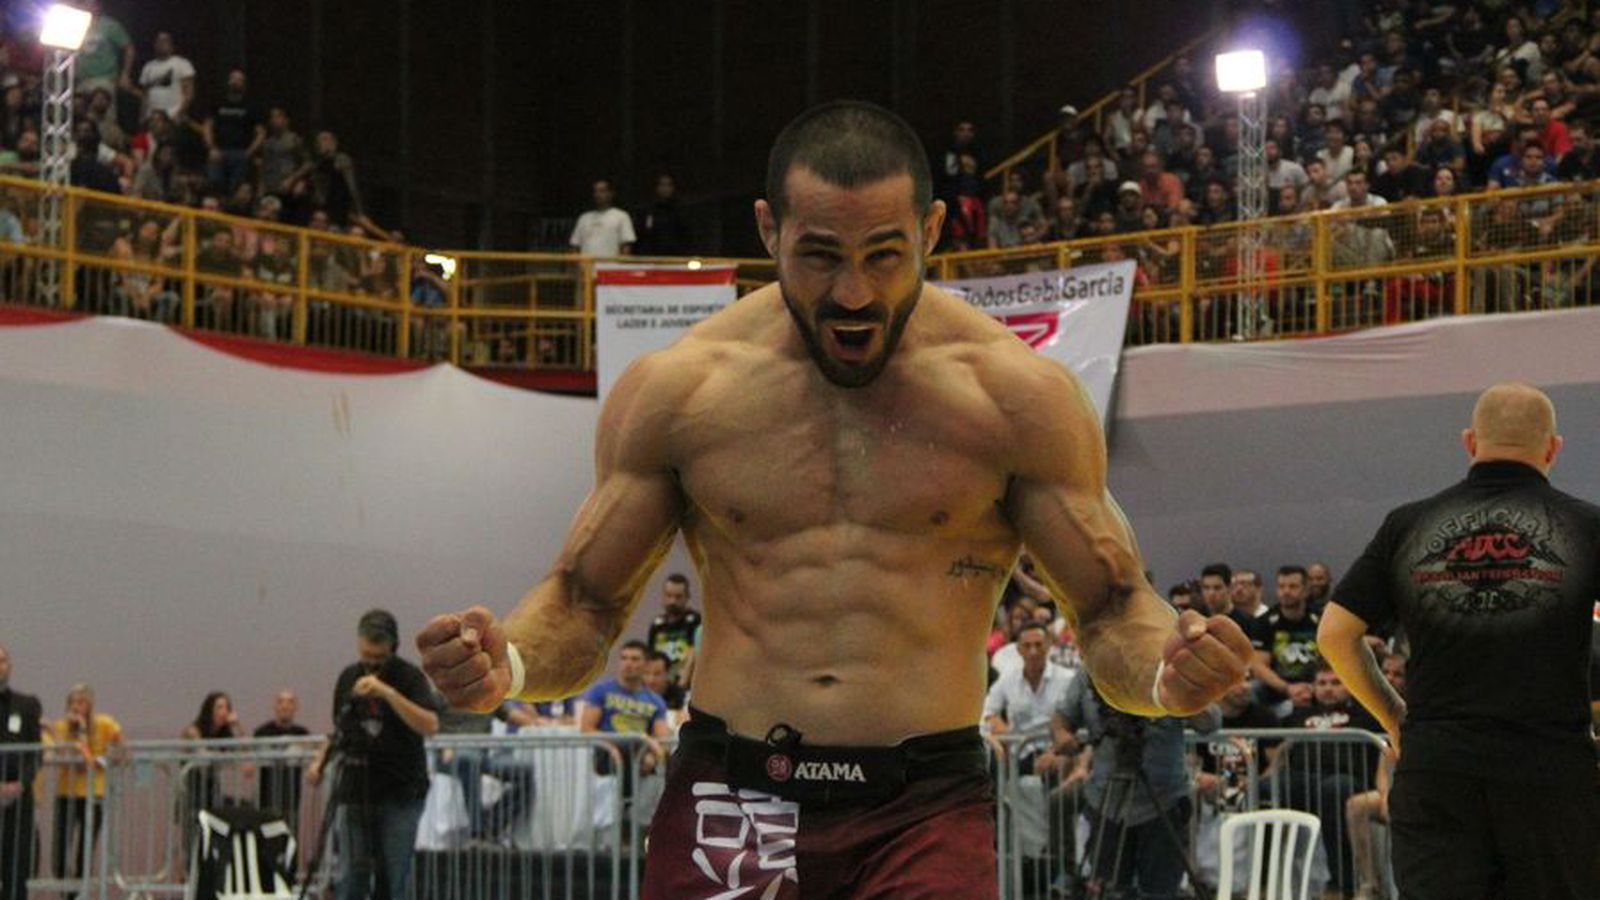 Davi Ramos hoping for UFC call up following ADCC 2015 win - Bloody Elbow